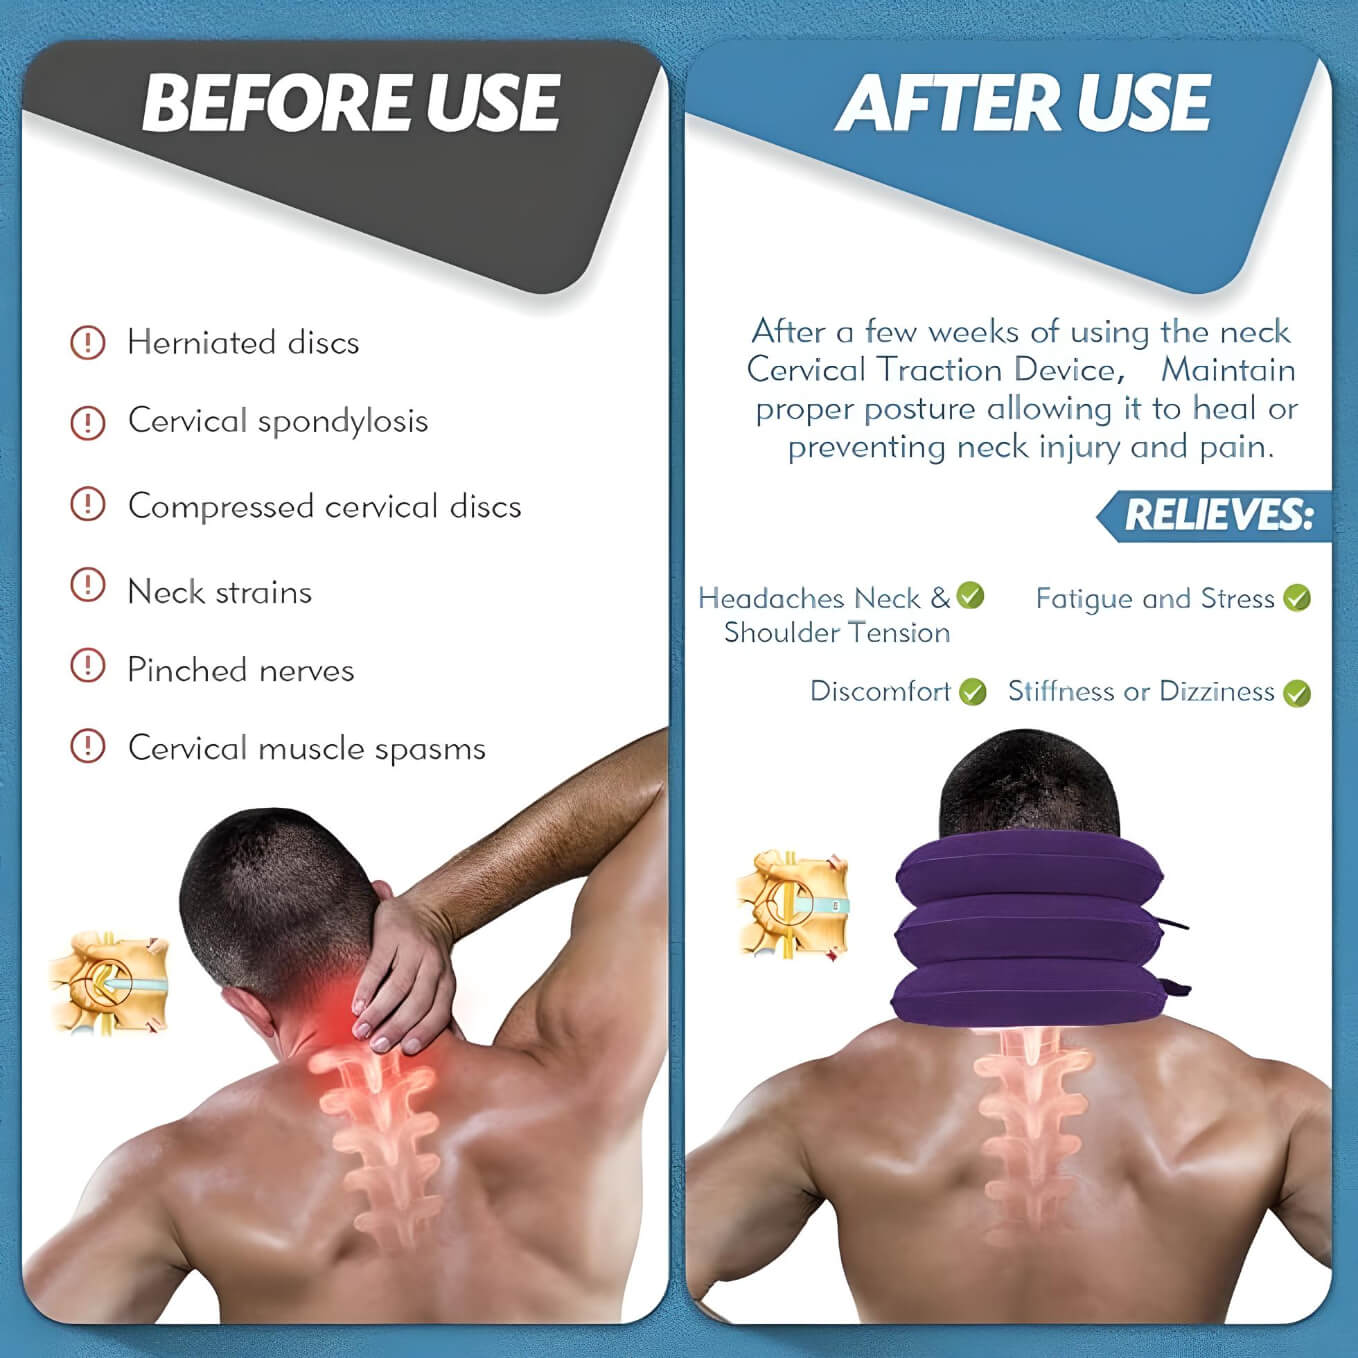 before-and-after-use-of-cervical-traction-device